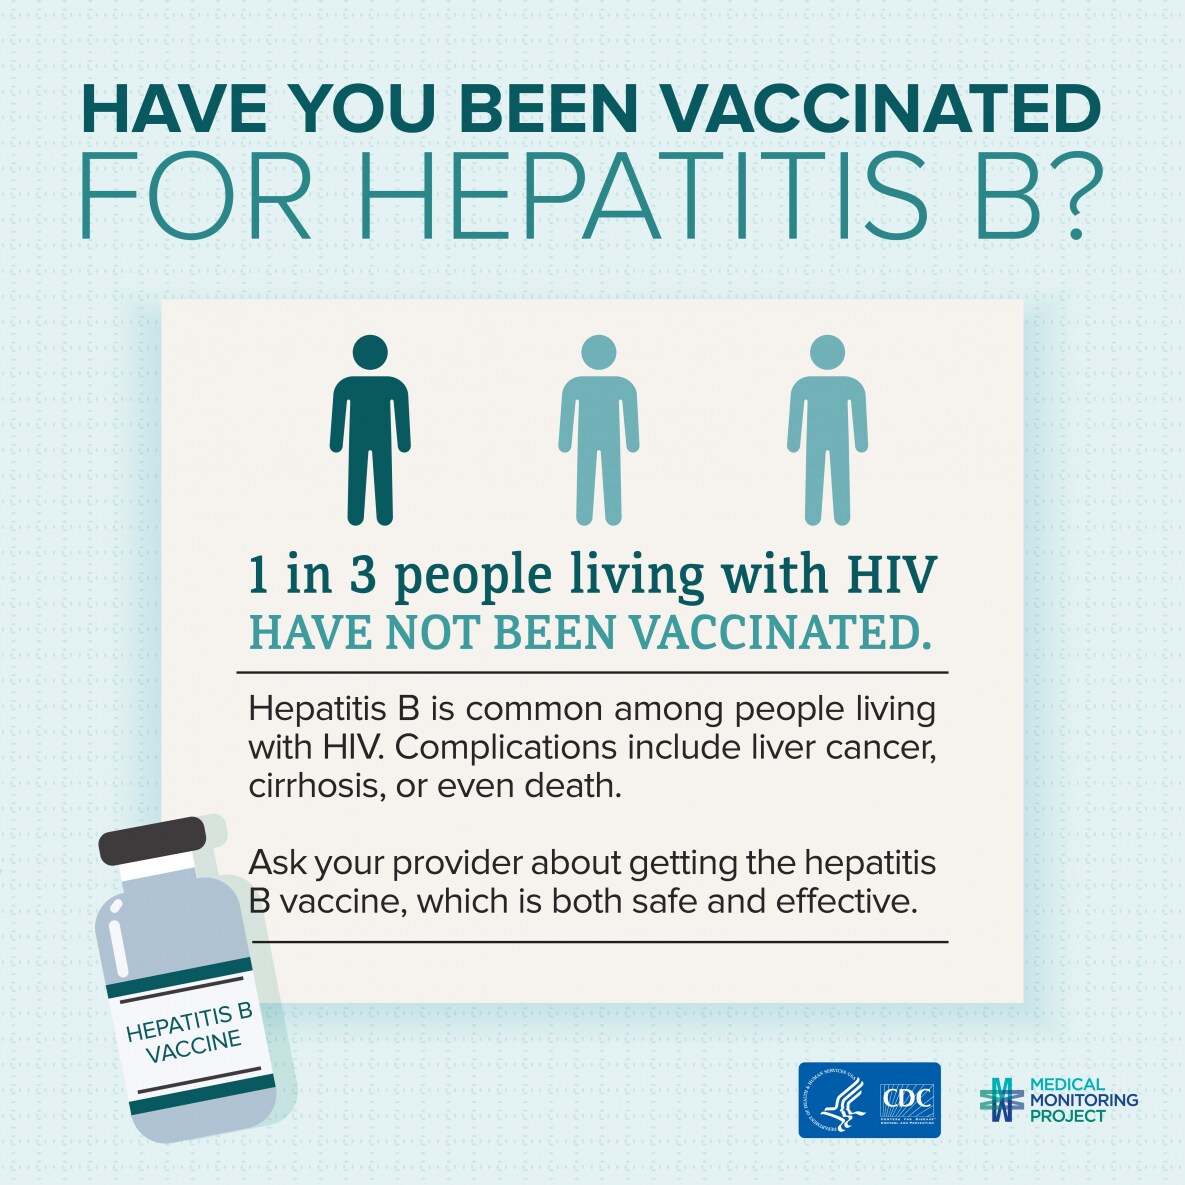 Have you been vaccinated for Hepatitis B? 1 in 3 people living with HIV have not been vaccinated. Hepatitis B is common among people living with HIV. Complications include liver cancer, cirrhosis, or even death. Ask your provider about getting the Hepatitis B vaccine, which is both safe and effective.